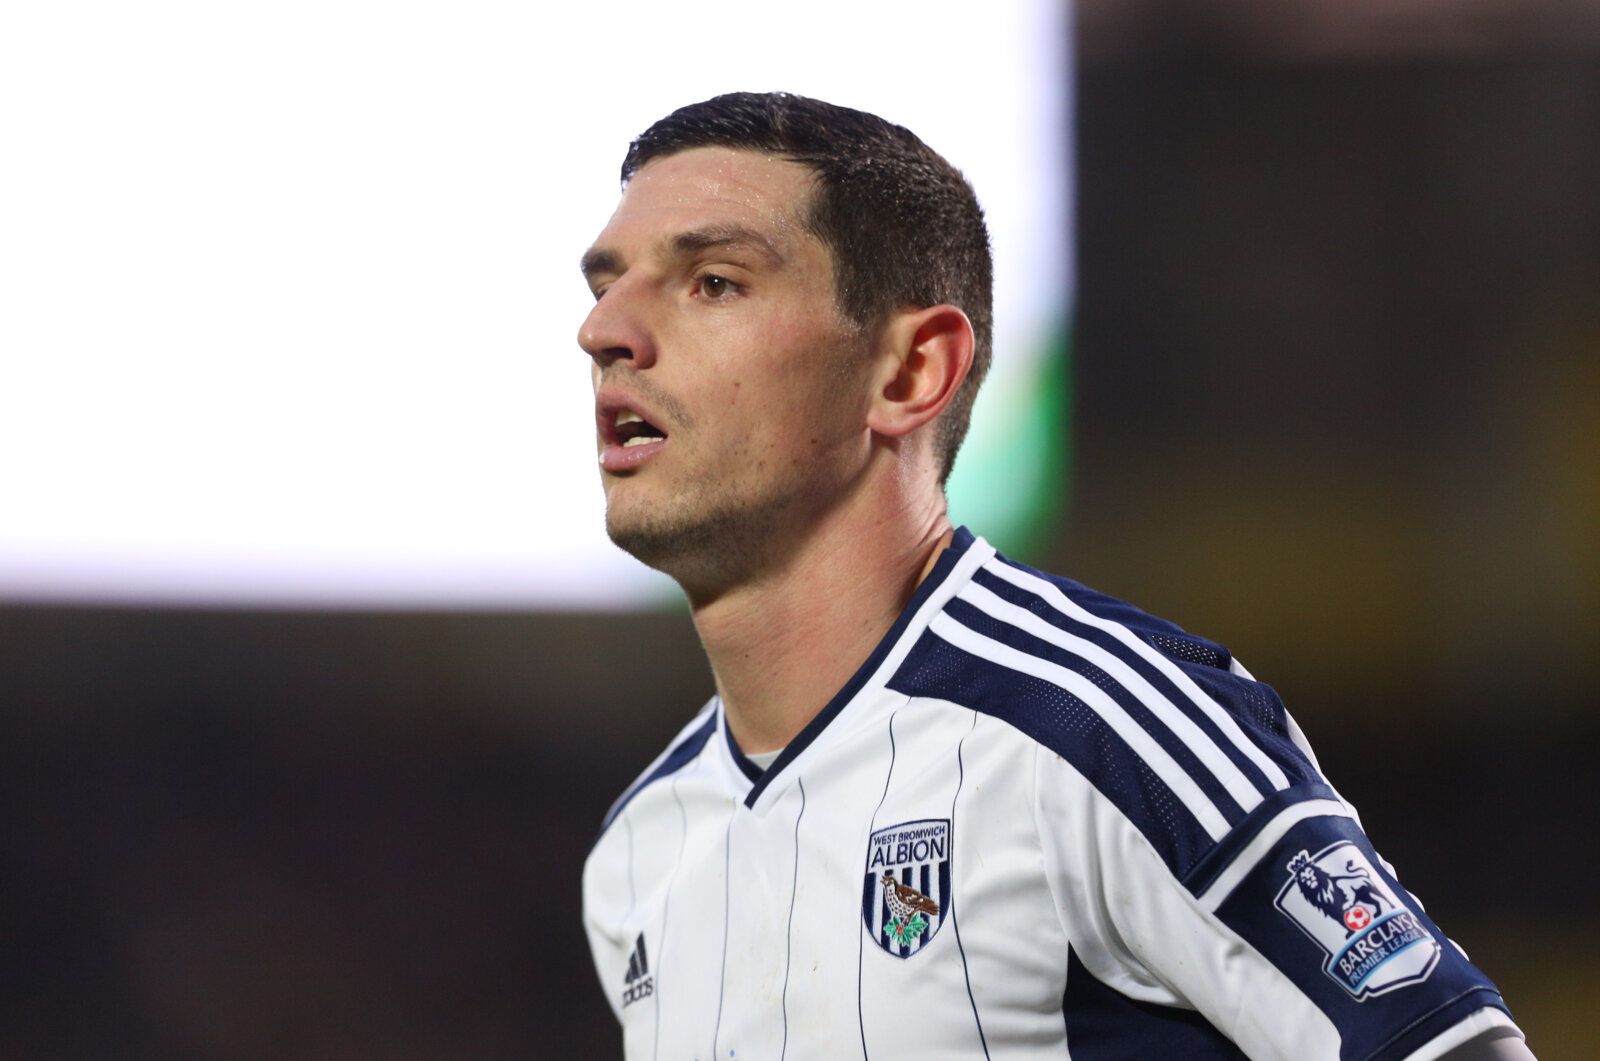 Football - Hull City v West Bromwich Albion - Barclays Premier League - The Kingston Communications Stadium - 14/15 - 6/12/14 
Graham Dorrans - West Bromwich Albion  
Mandatory Credit: Action Images / Craig Brough 
EDITORIAL USE ONLY. No use with unauthorized audio, video, data, fixture lists, club/league logos or 